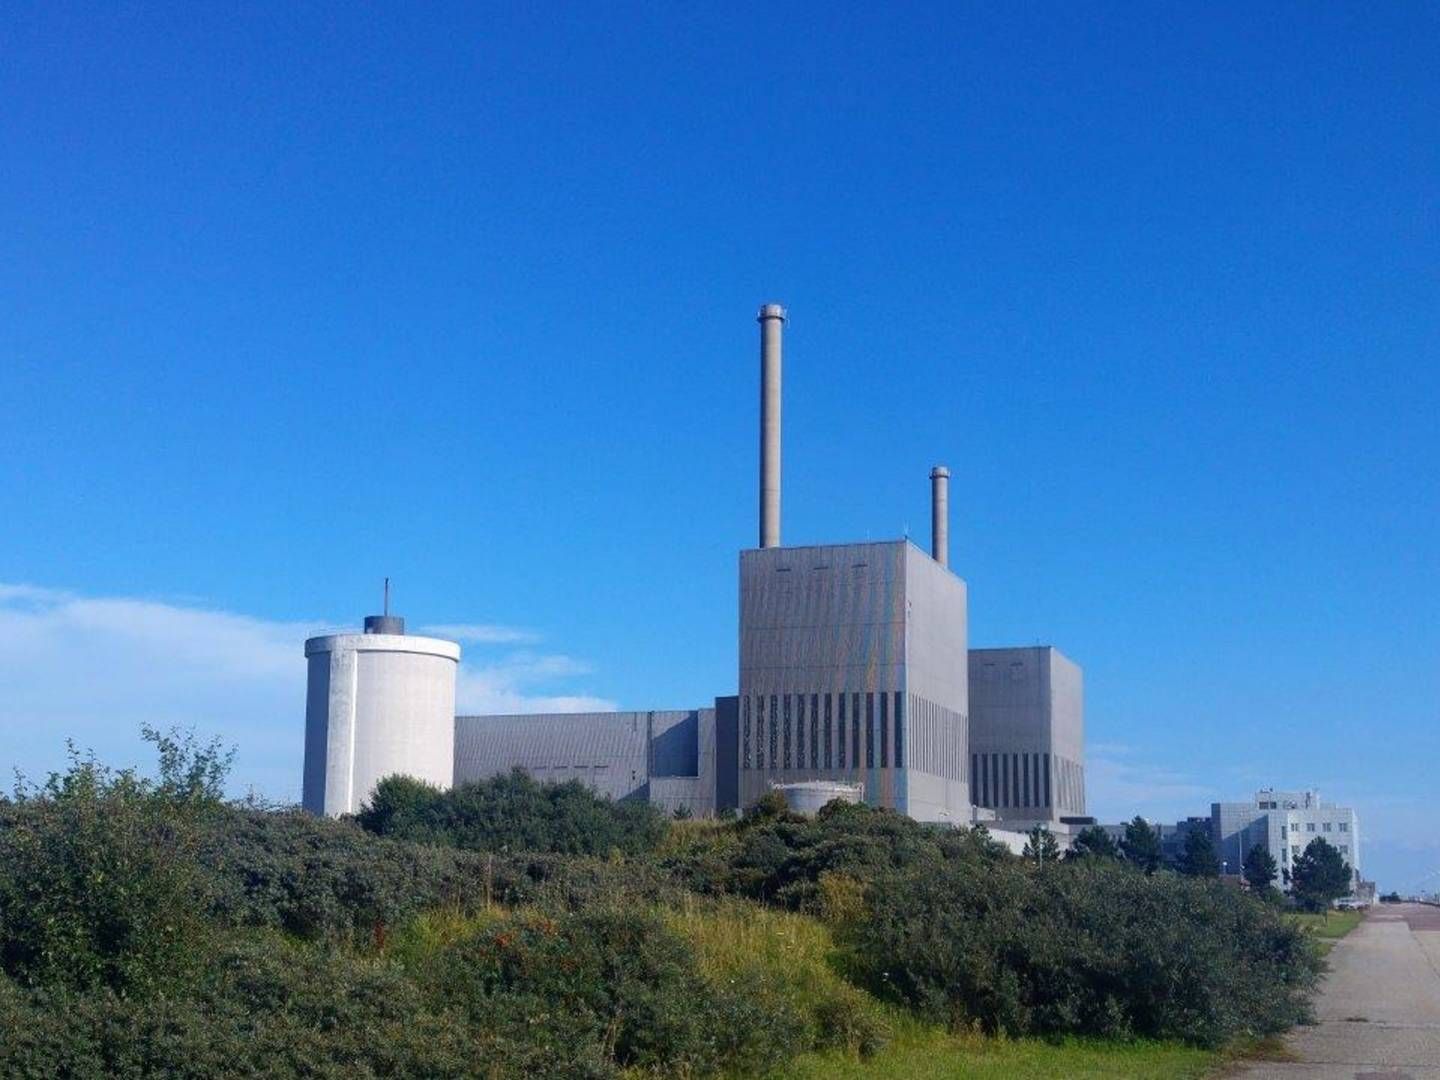 Nuclear power plant Barsebäck, which closed in 2005. Now, the owners seek to build a new facility 15 kilometers away. | Photo: PR / Uniper